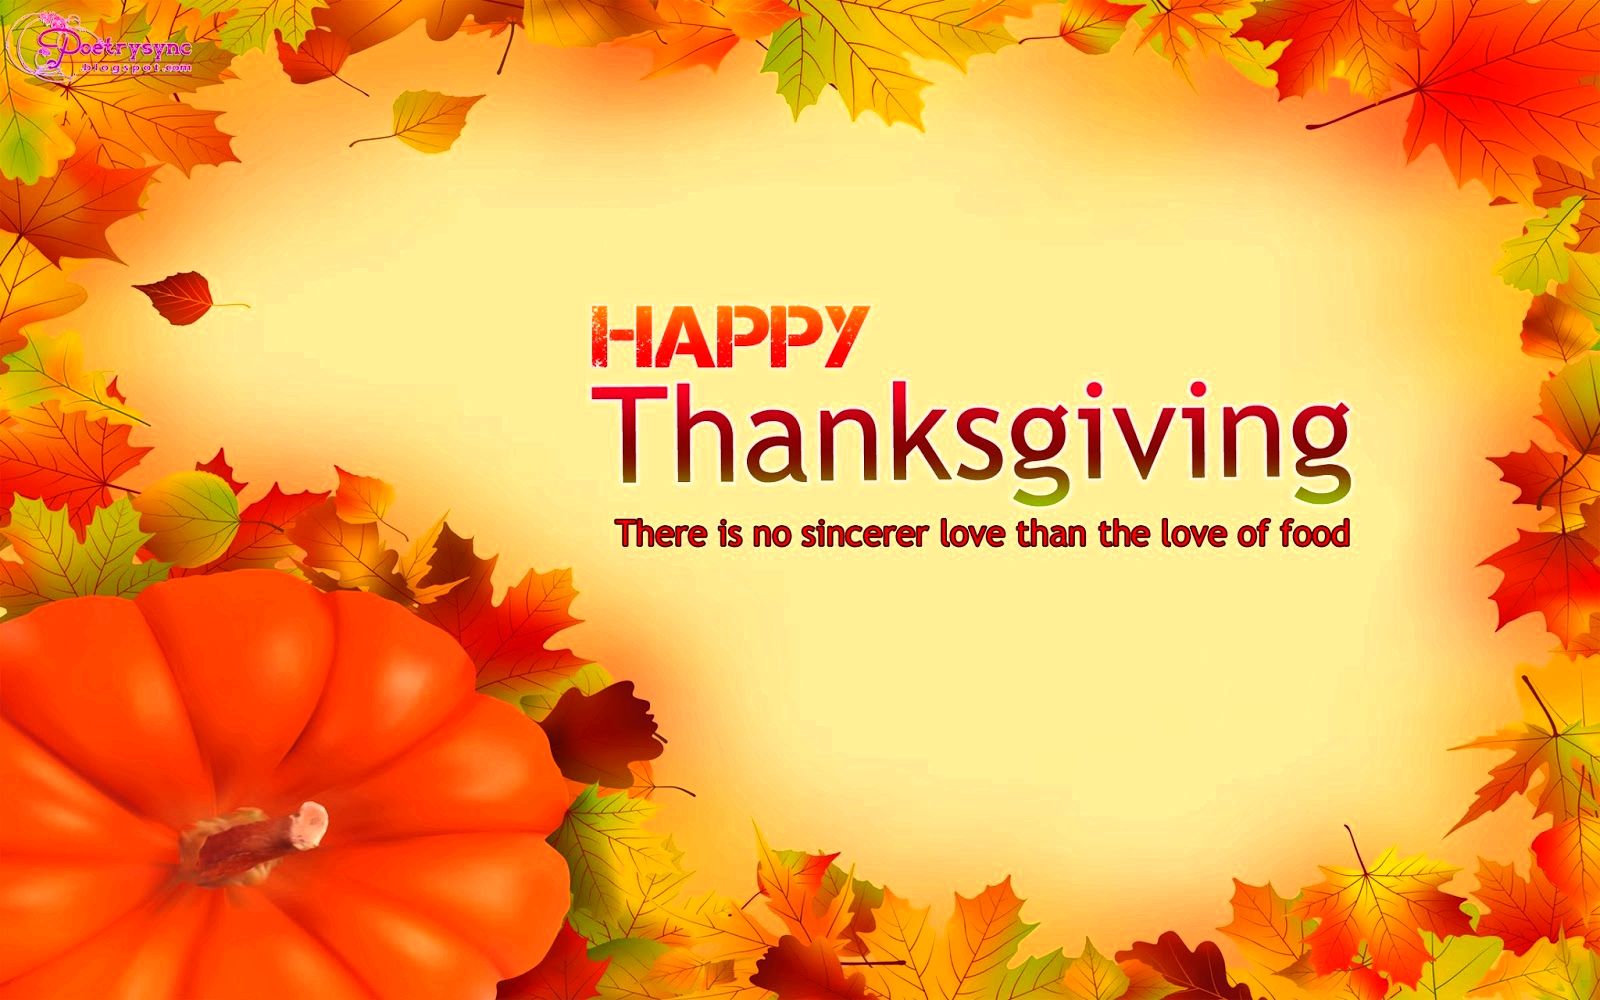 Thanksgiving wishes, quotes, and prayers - wishes messages sayings method to